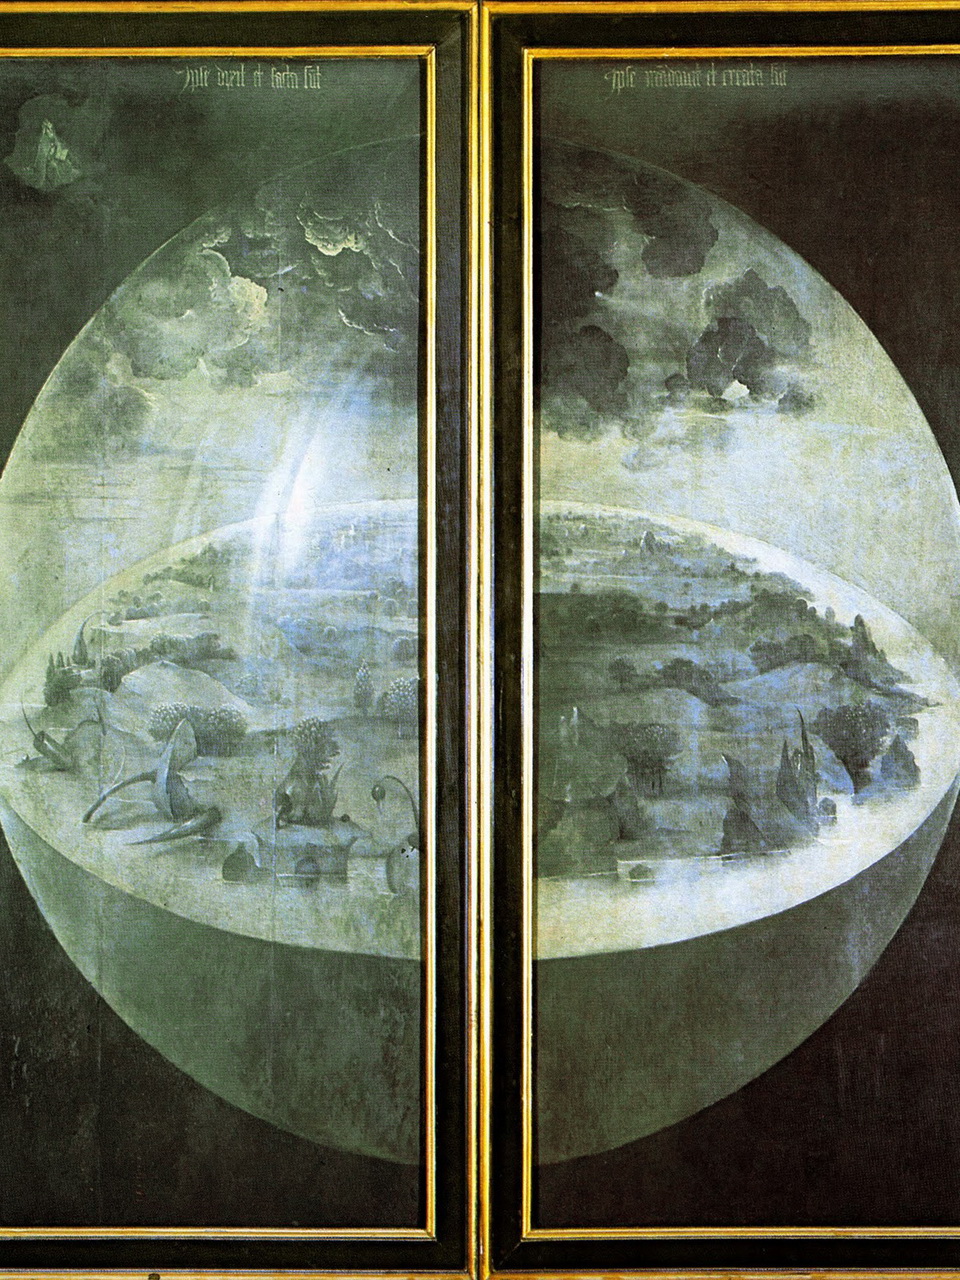 A closed triptych (two panels) oil painting from 1504 where the earth is encapsulated in a globe with clouds covering the top, and the flat earth across the lower third; one panel depicts nature and the other has human created items like a firecracker